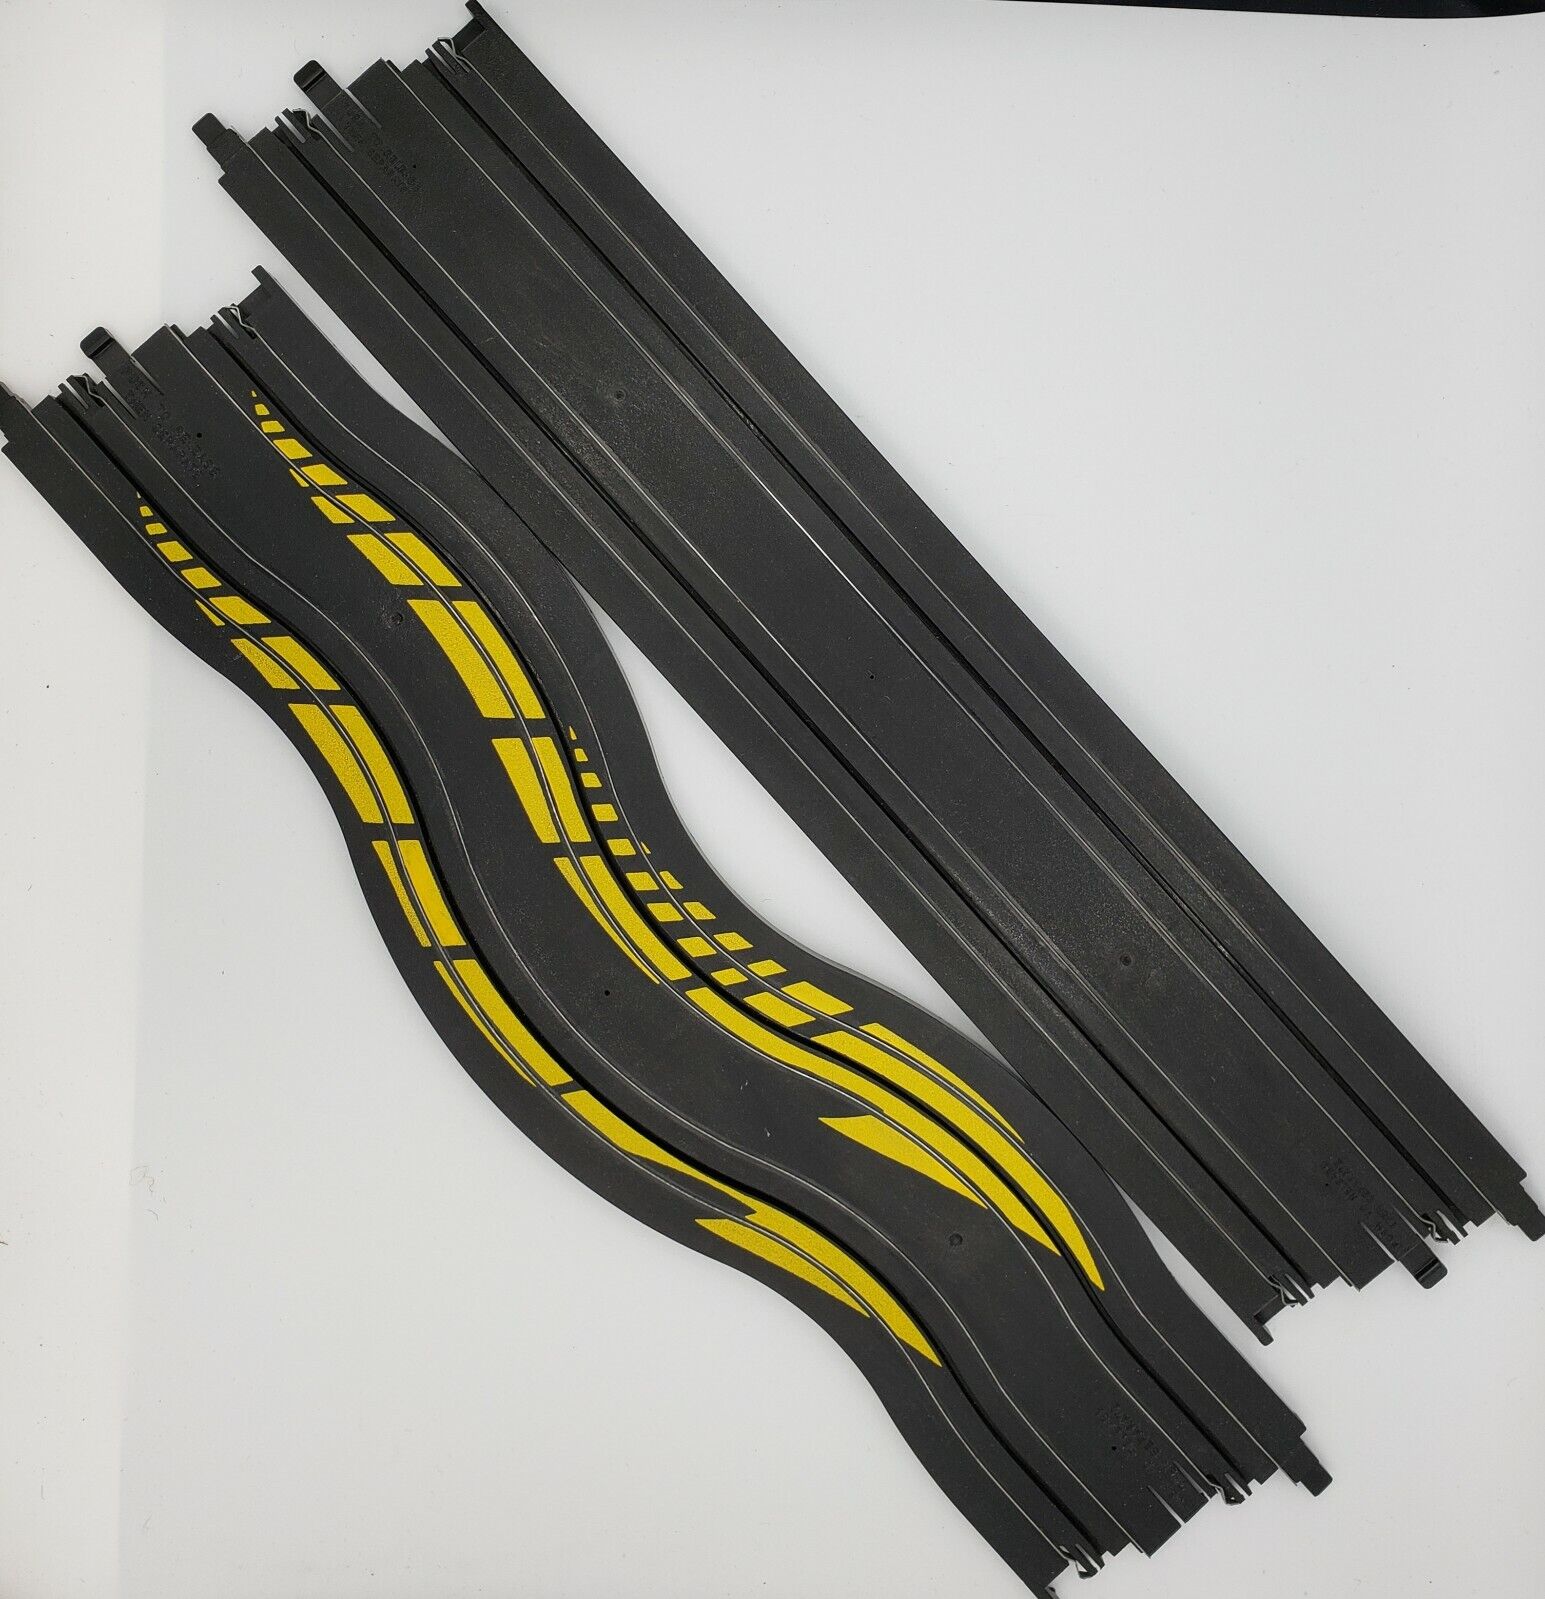 Marchon Track 381mm 15" straight track 88819 & 381mm 15" wiggle track 22127 